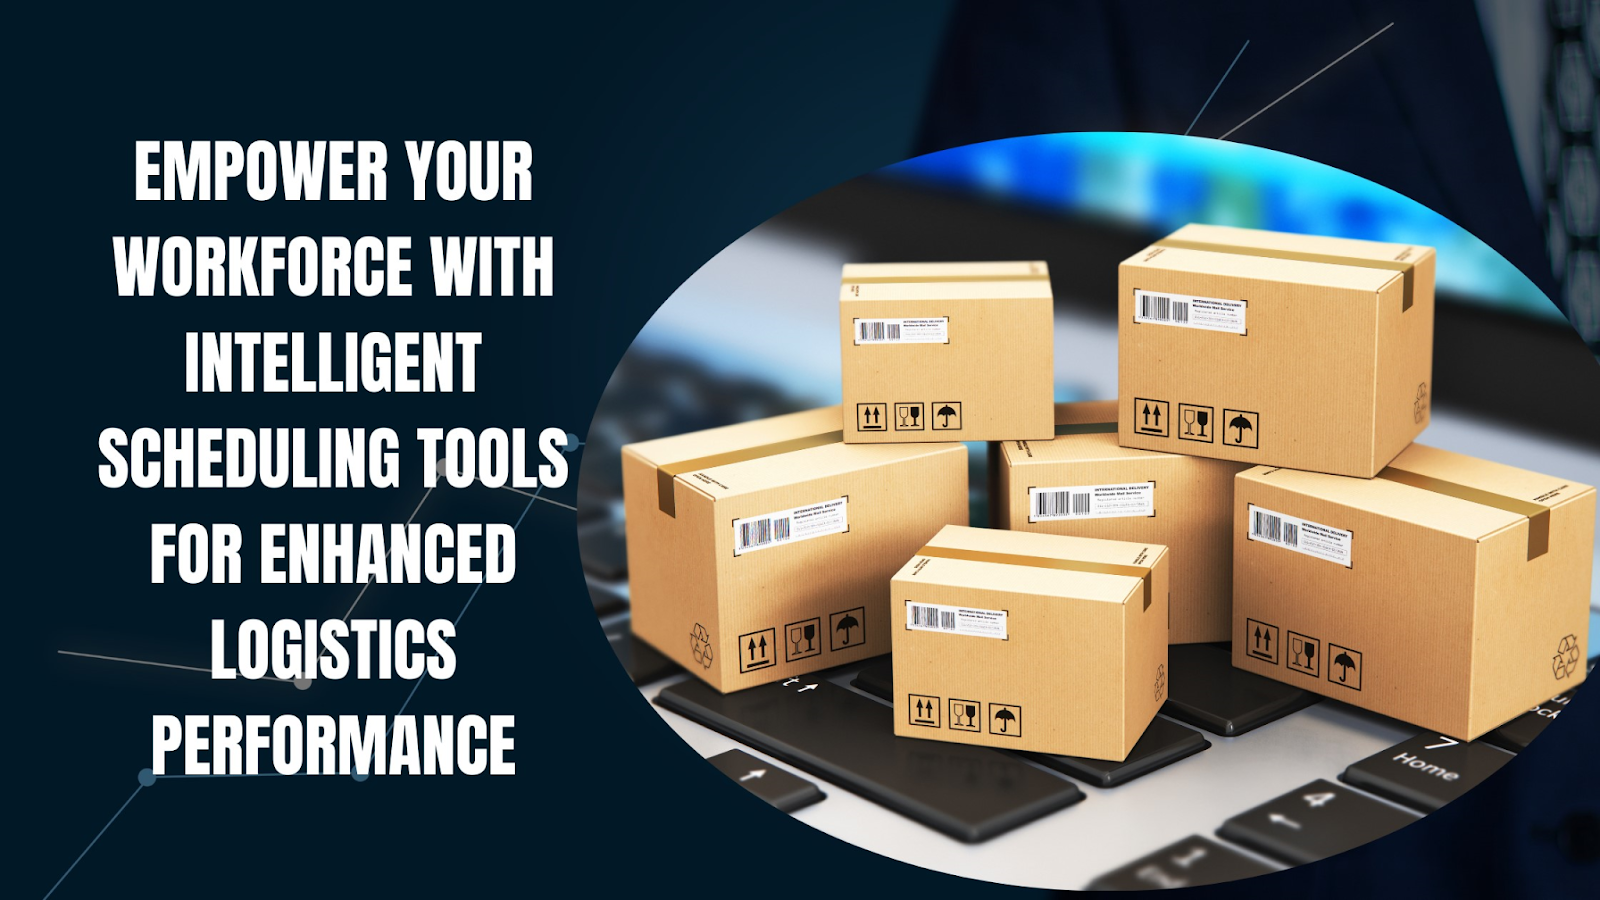 Empower Your Workforce with Intelligent Scheduling Tools for Enhanced Logistics Performance